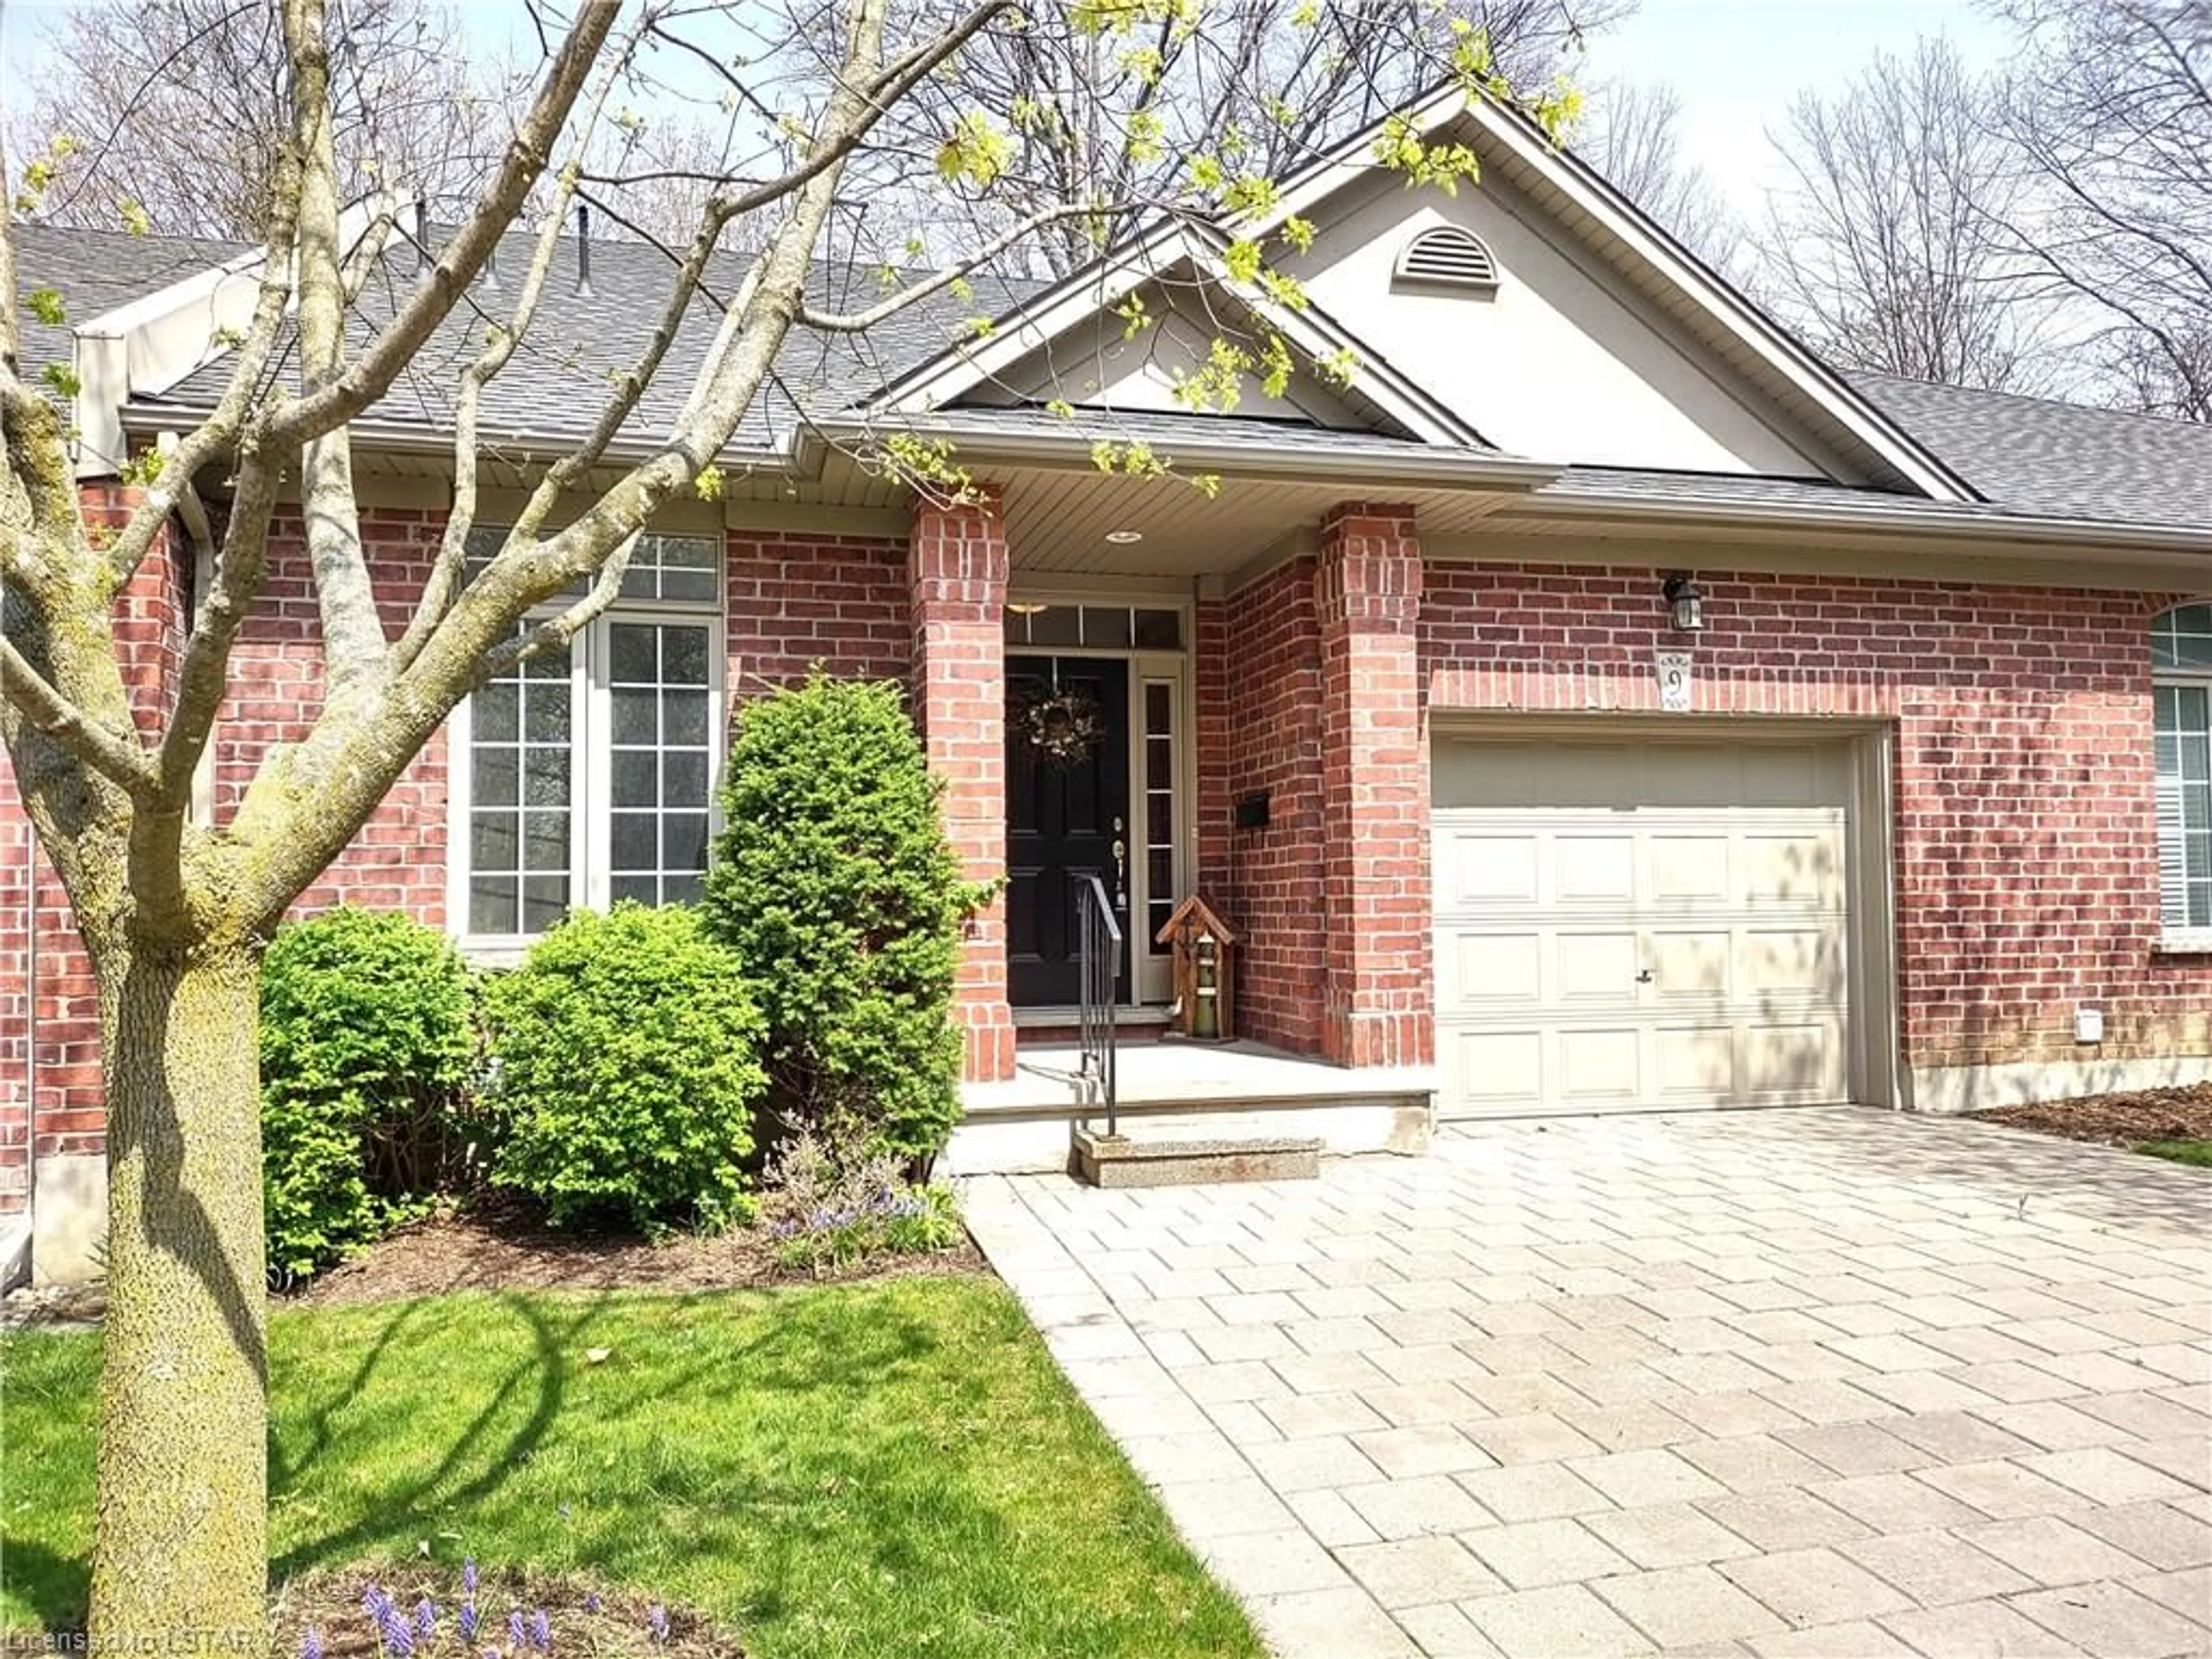 Home with brick exterior material for 417 Hyde Park Rd #9, London Ontario N6H 3R9